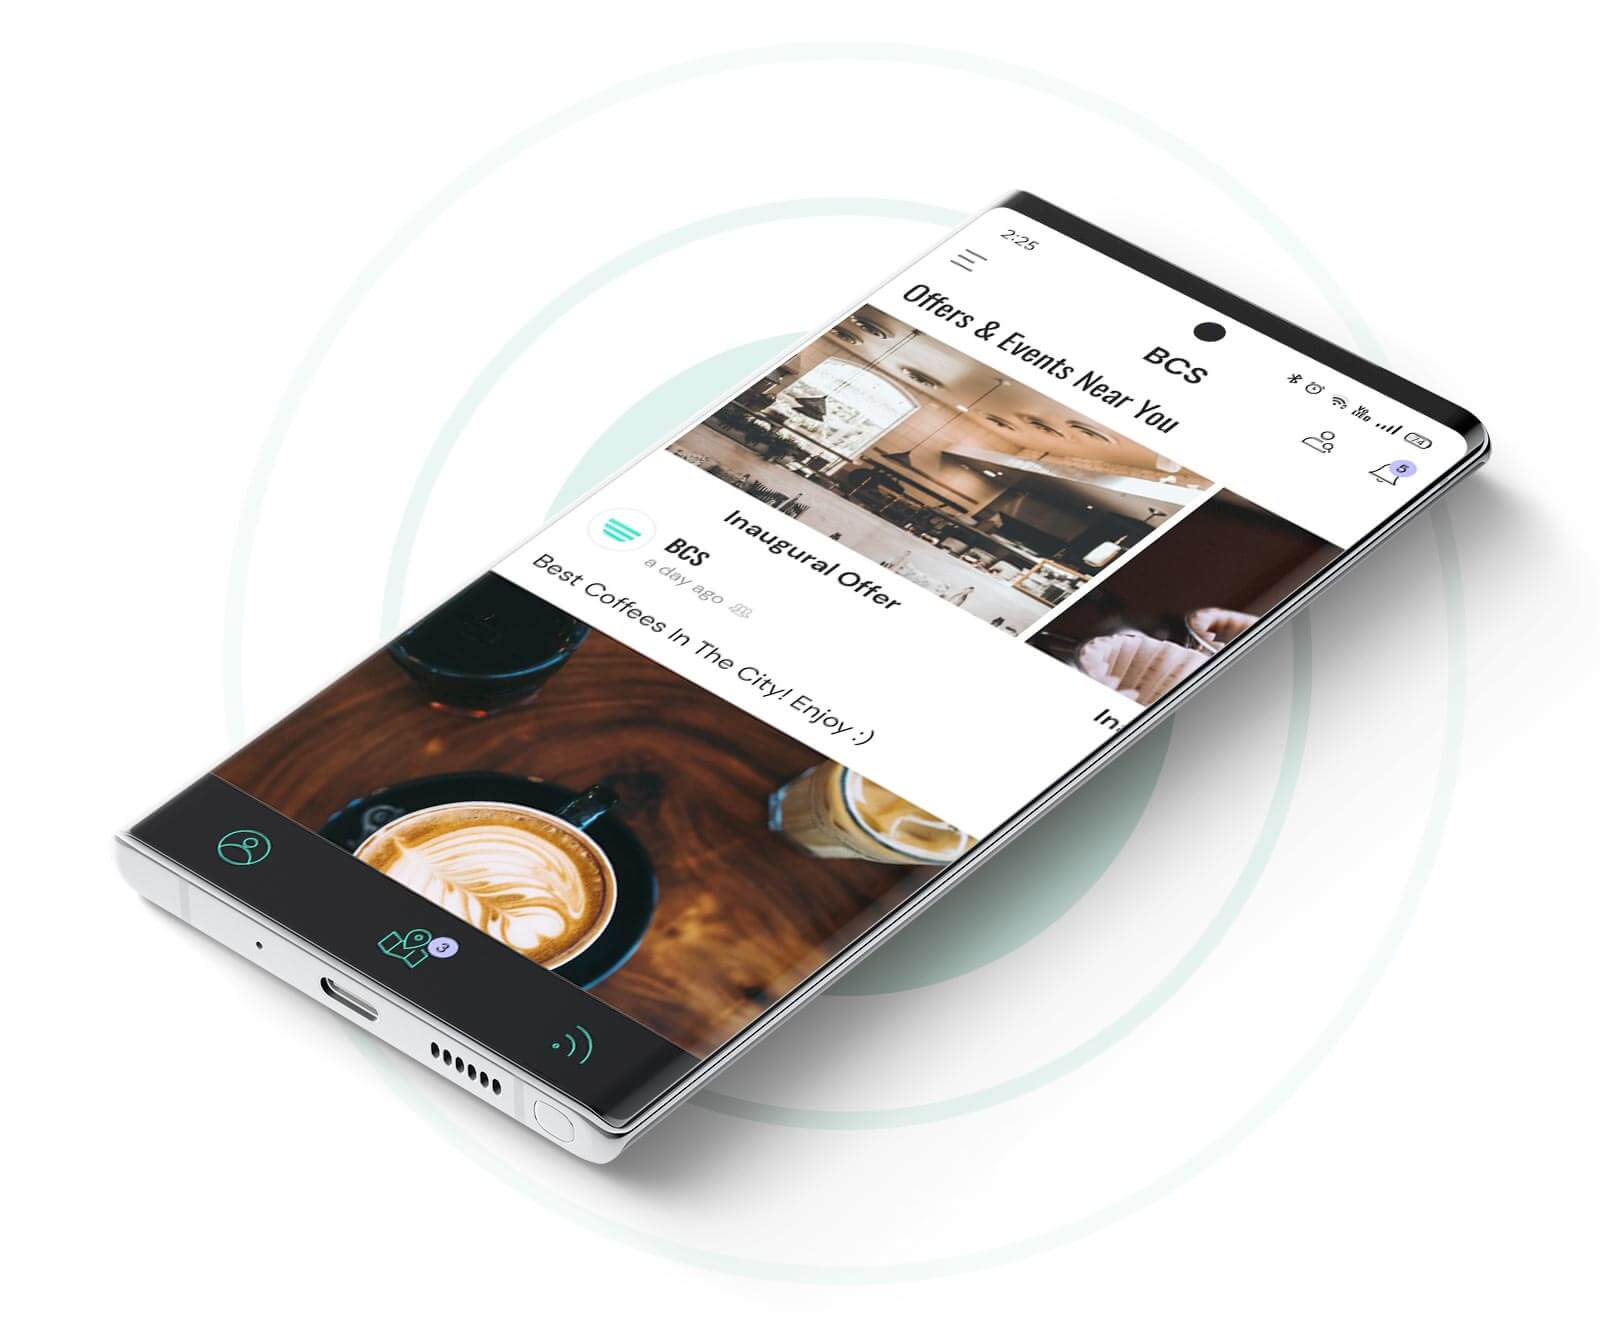 Best Coffee Shops – An Android app developed by Zco Corporation